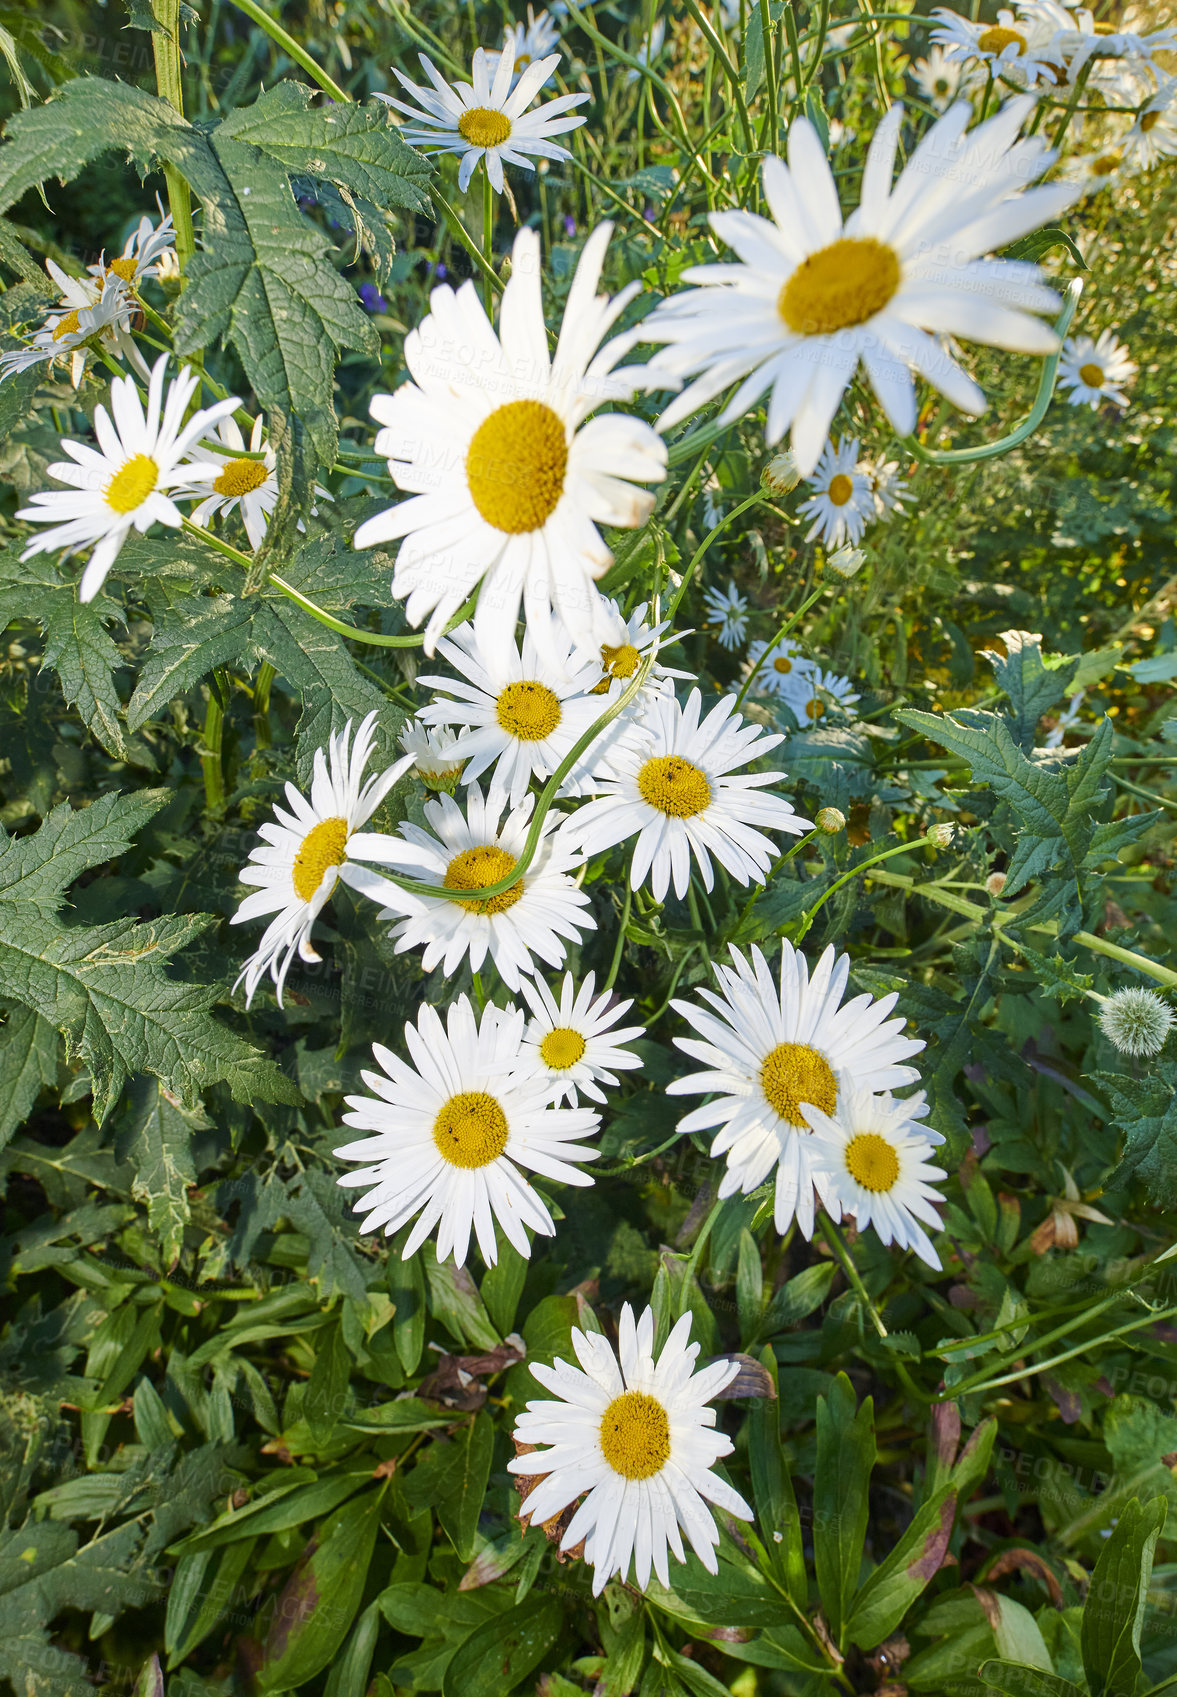 Buy stock photo Daisy flowers growing in a field or botanical garden on a sunny day outdoors. Shasta or max chrysanthemum daisies from the asteraceae species with white petals and yellow pistils blooming in spring